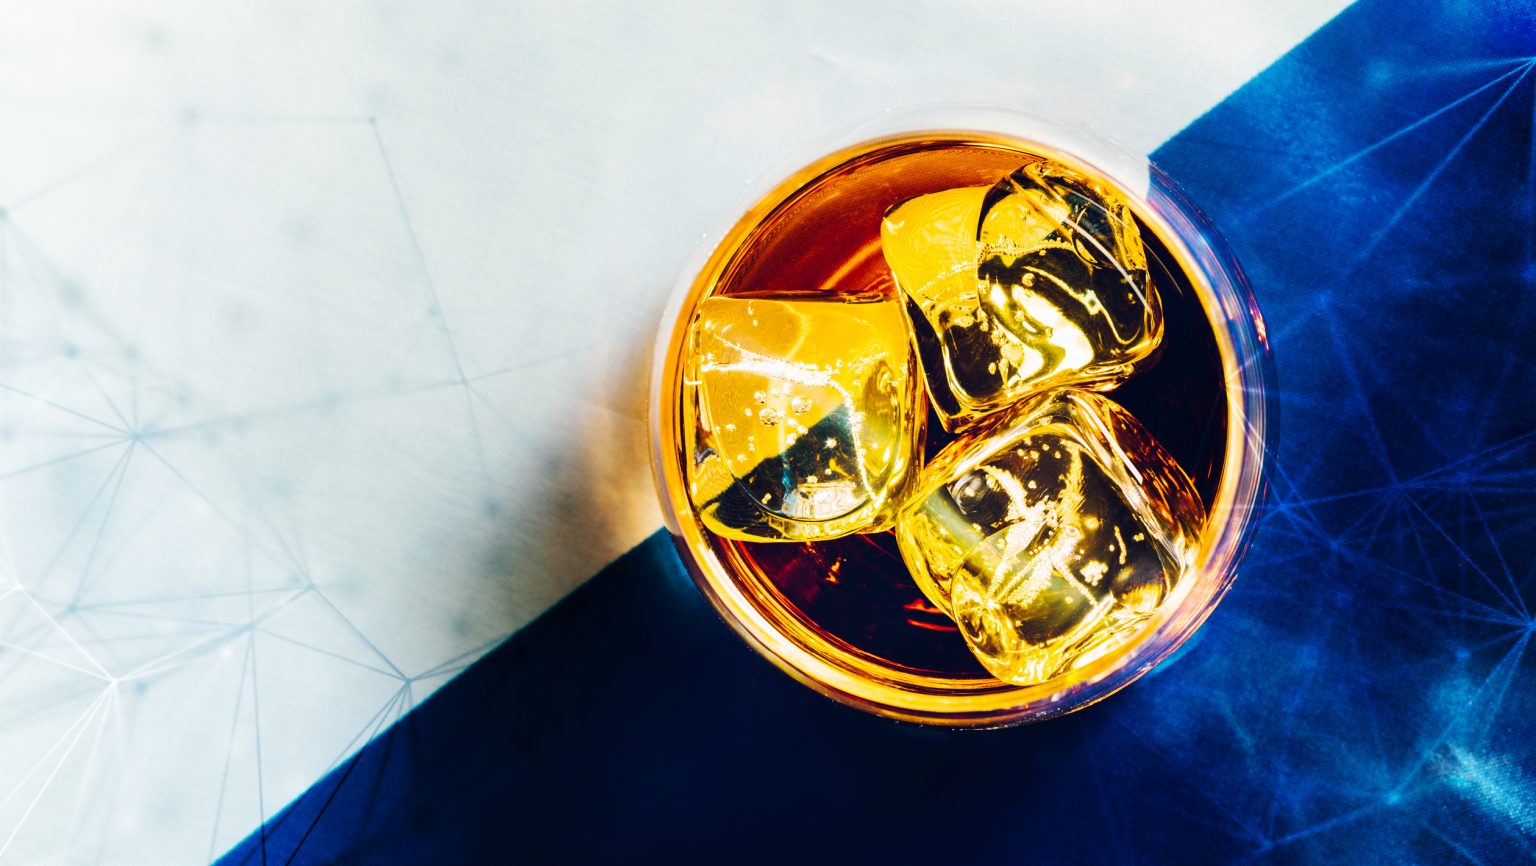 Does the Shape or Size of Ice Impact the Taste of Cocktails?